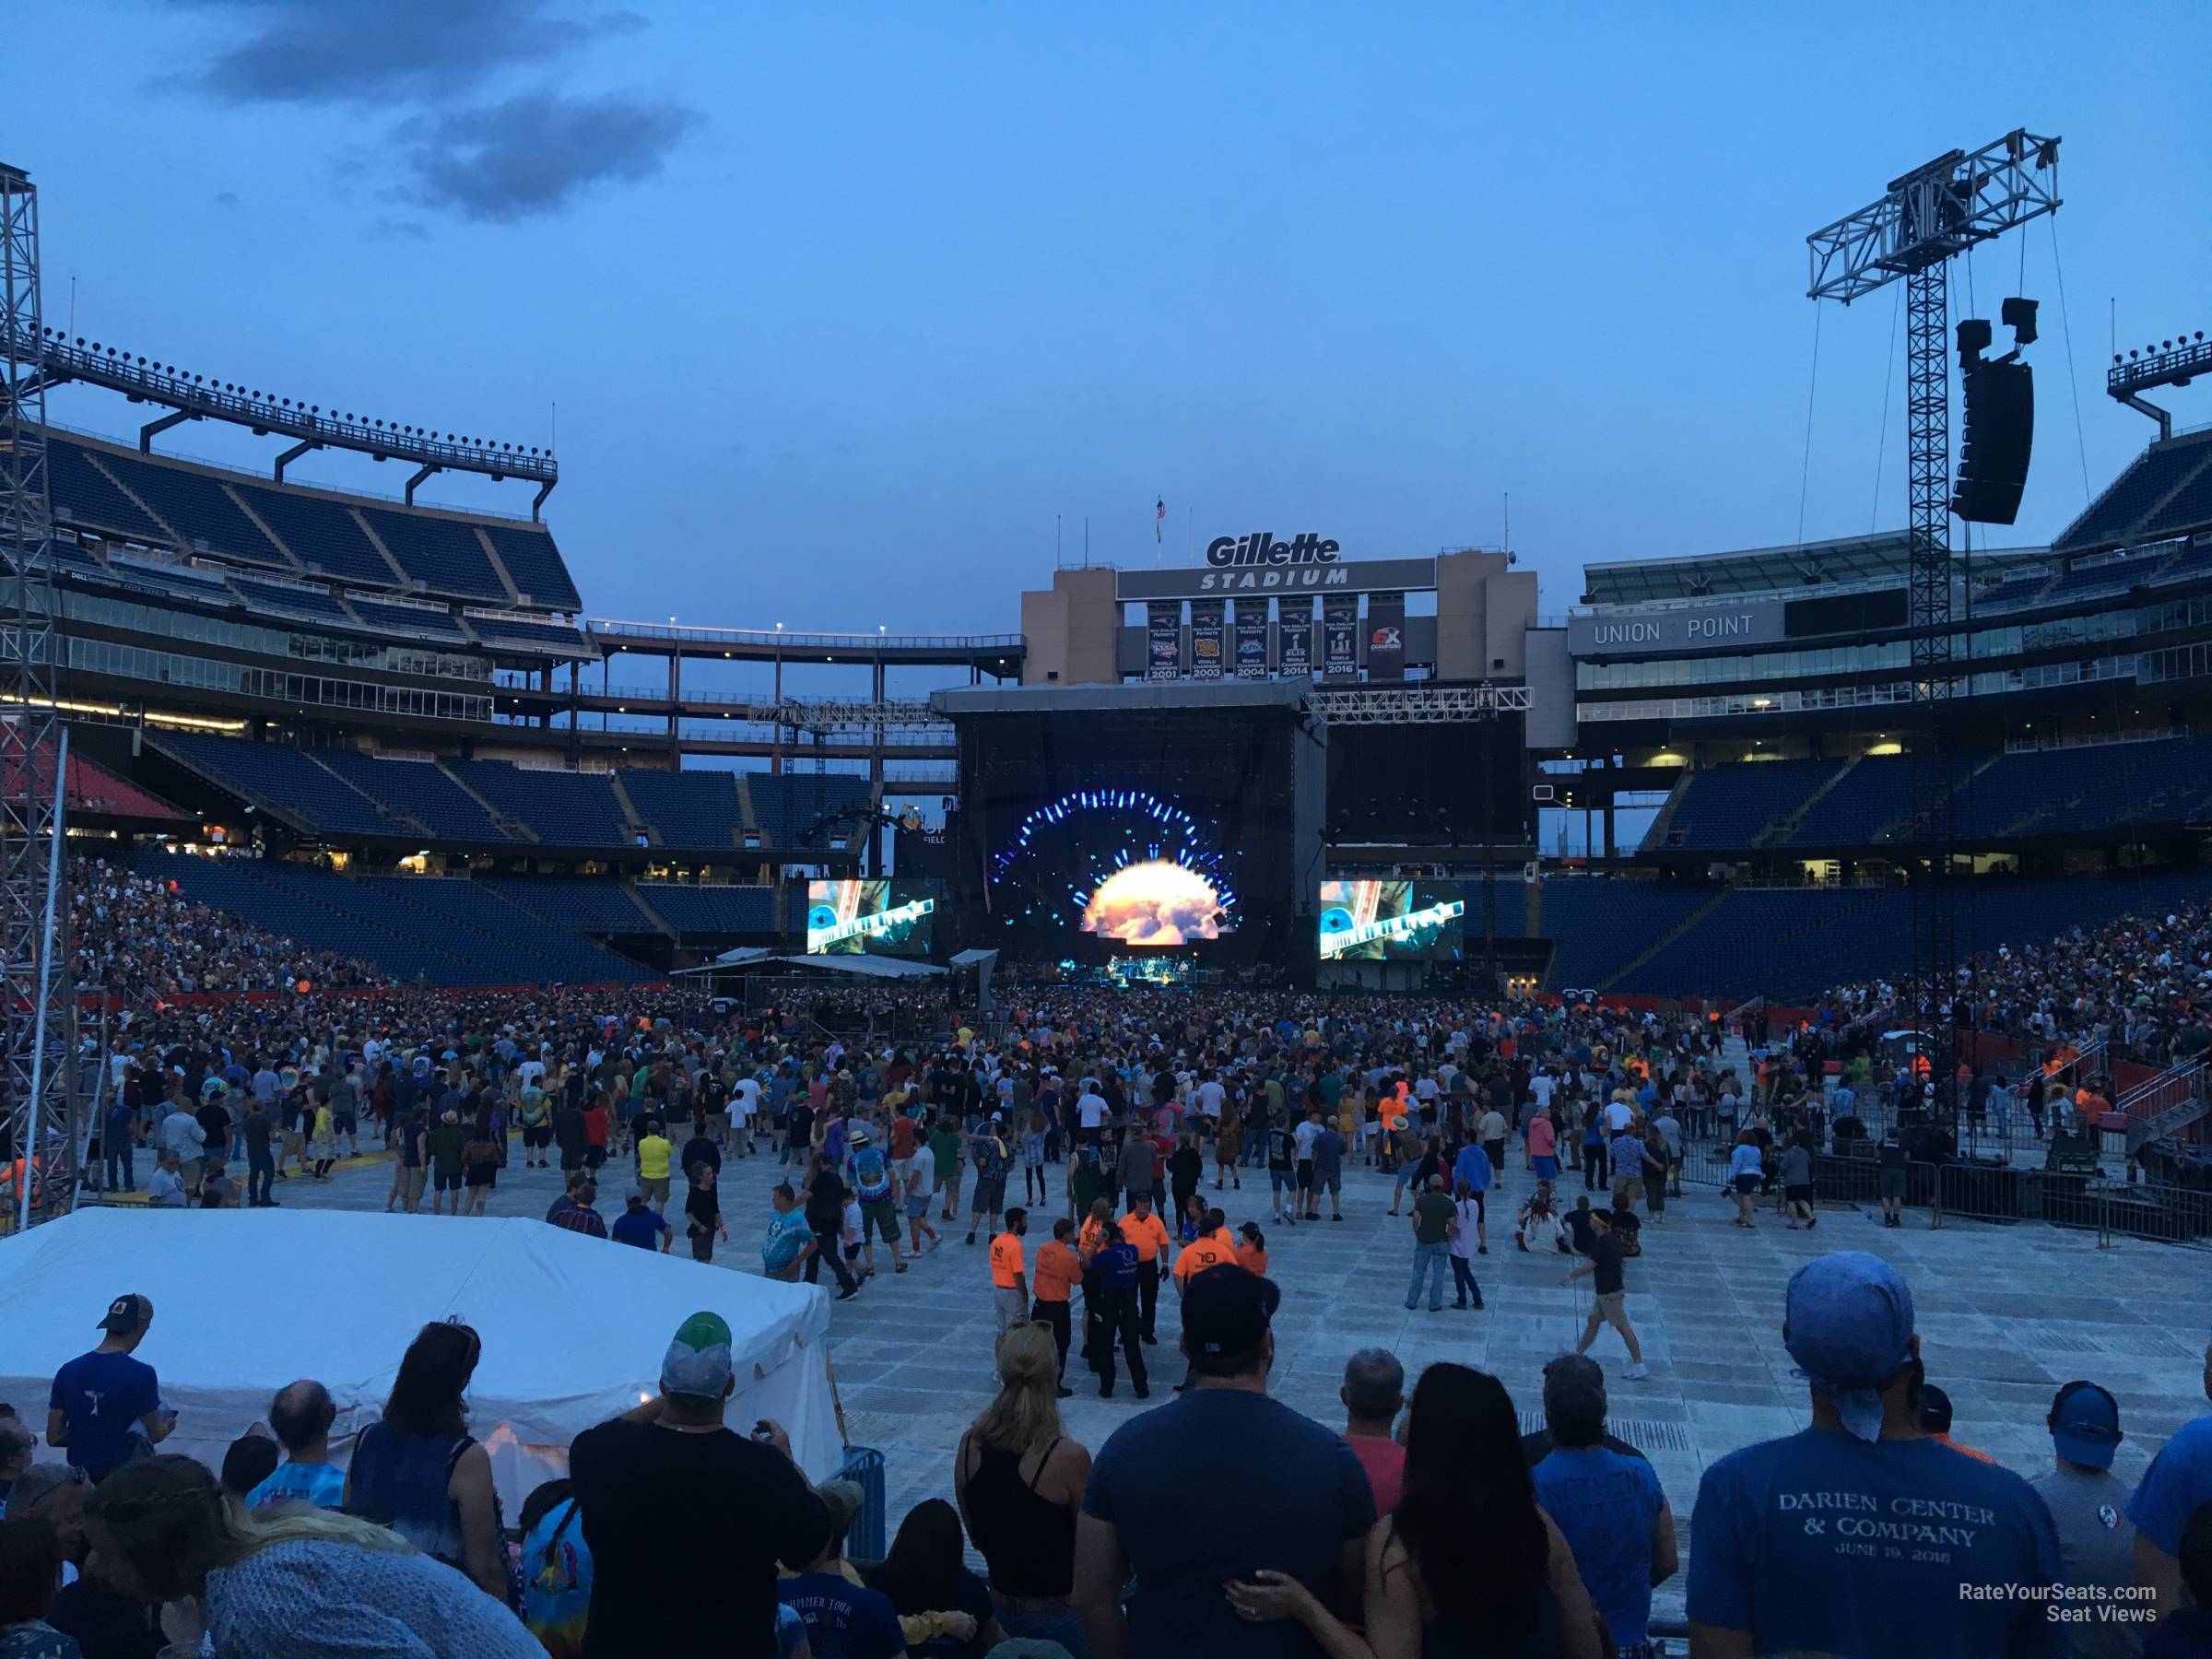 section 140, row 10 seat view  for concert - gillette stadium